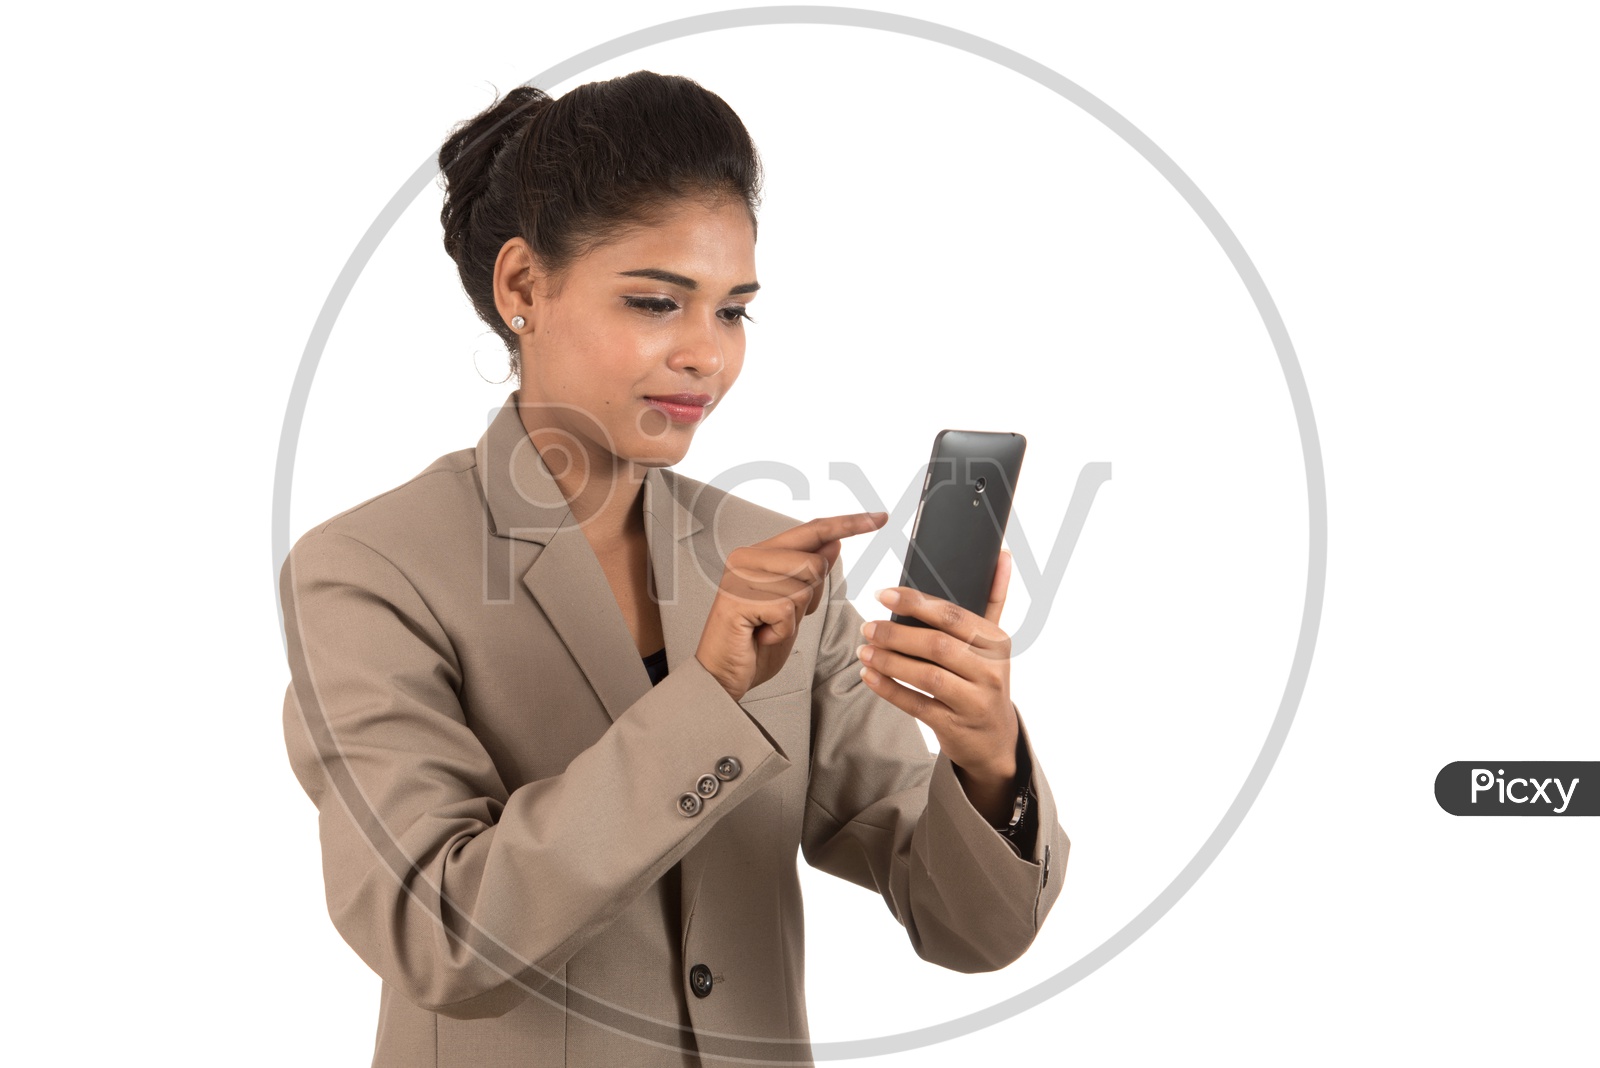 business woman using a mobile phone or smartphone isolated on a white background